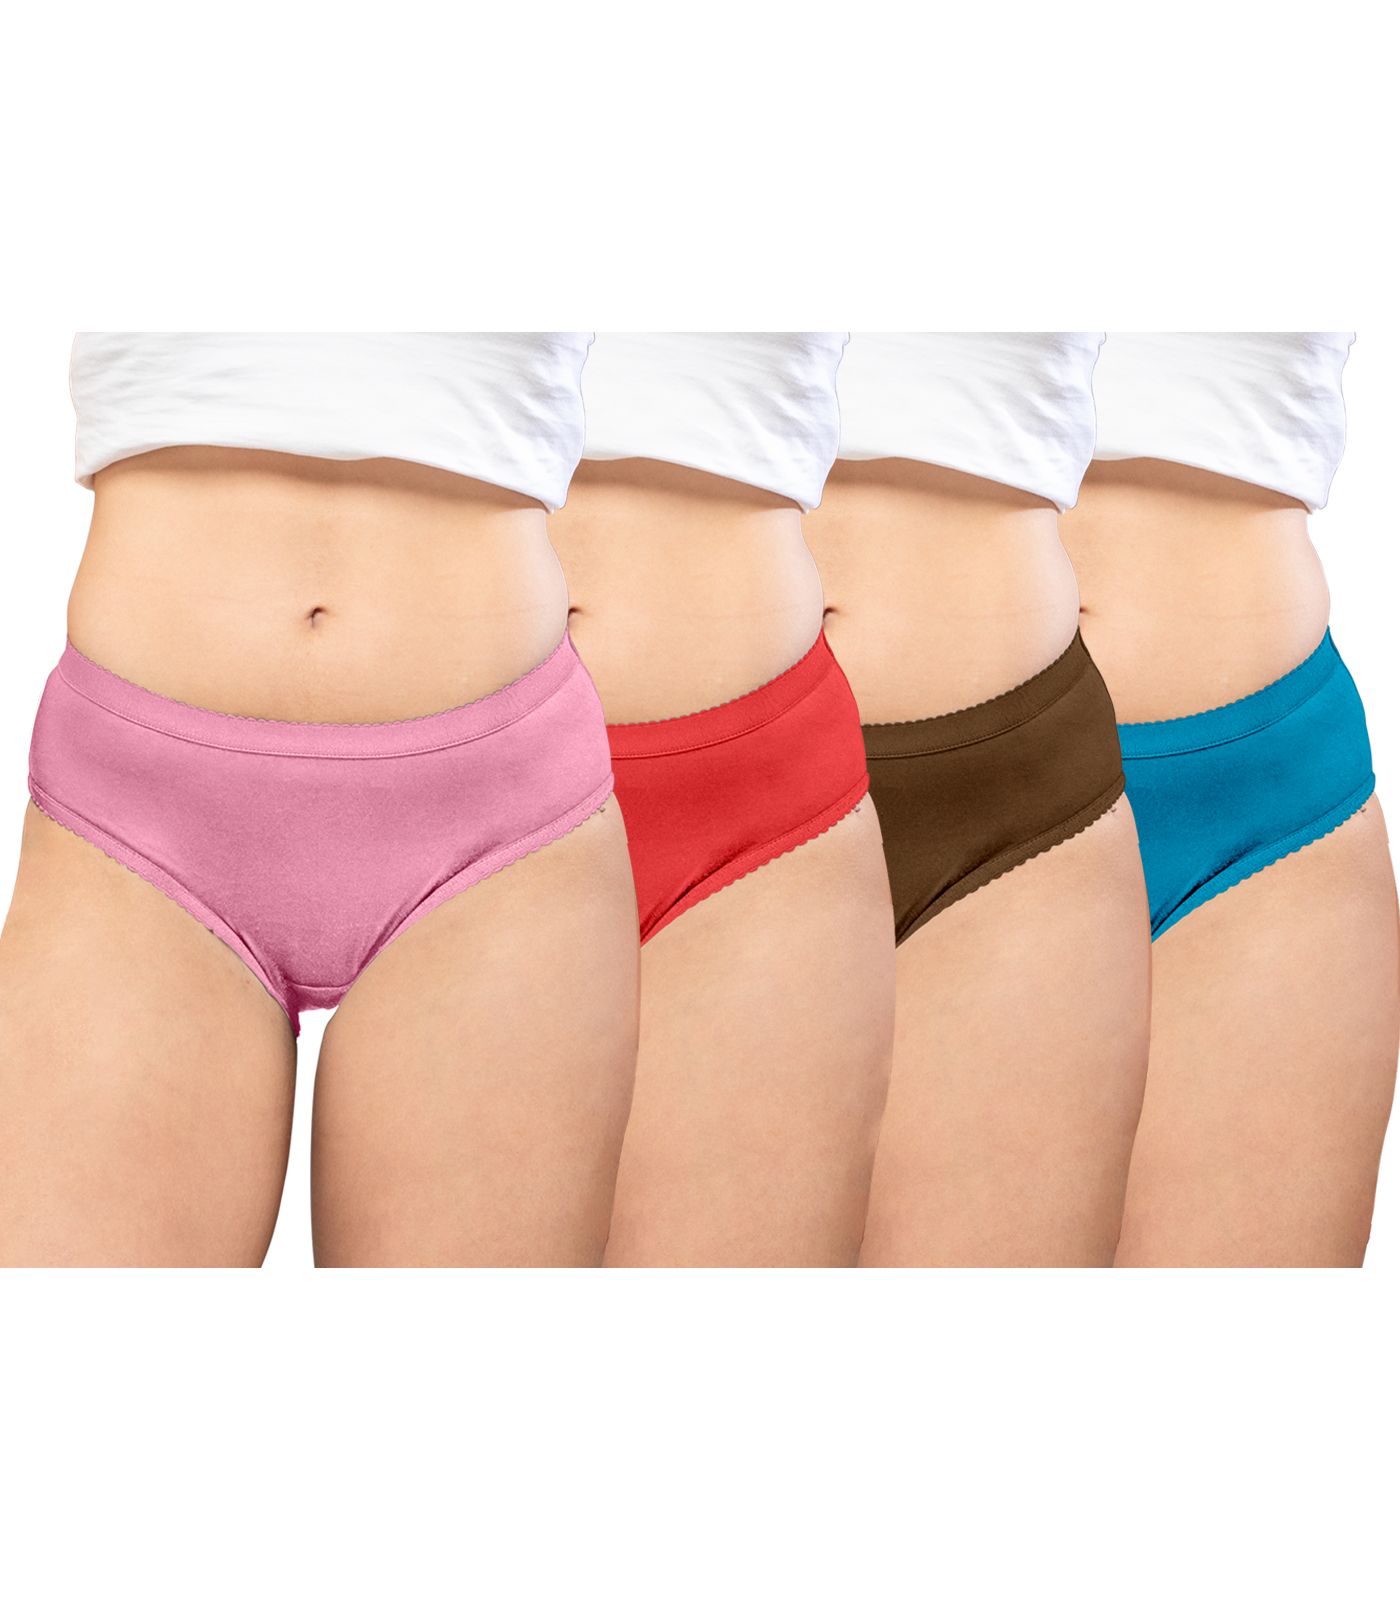 NRG Womens Cotton Assorted Colour Panties ( Pack of 4 Pastol Pink - Red - Light Brown - Turquoise ) L04 Hipster